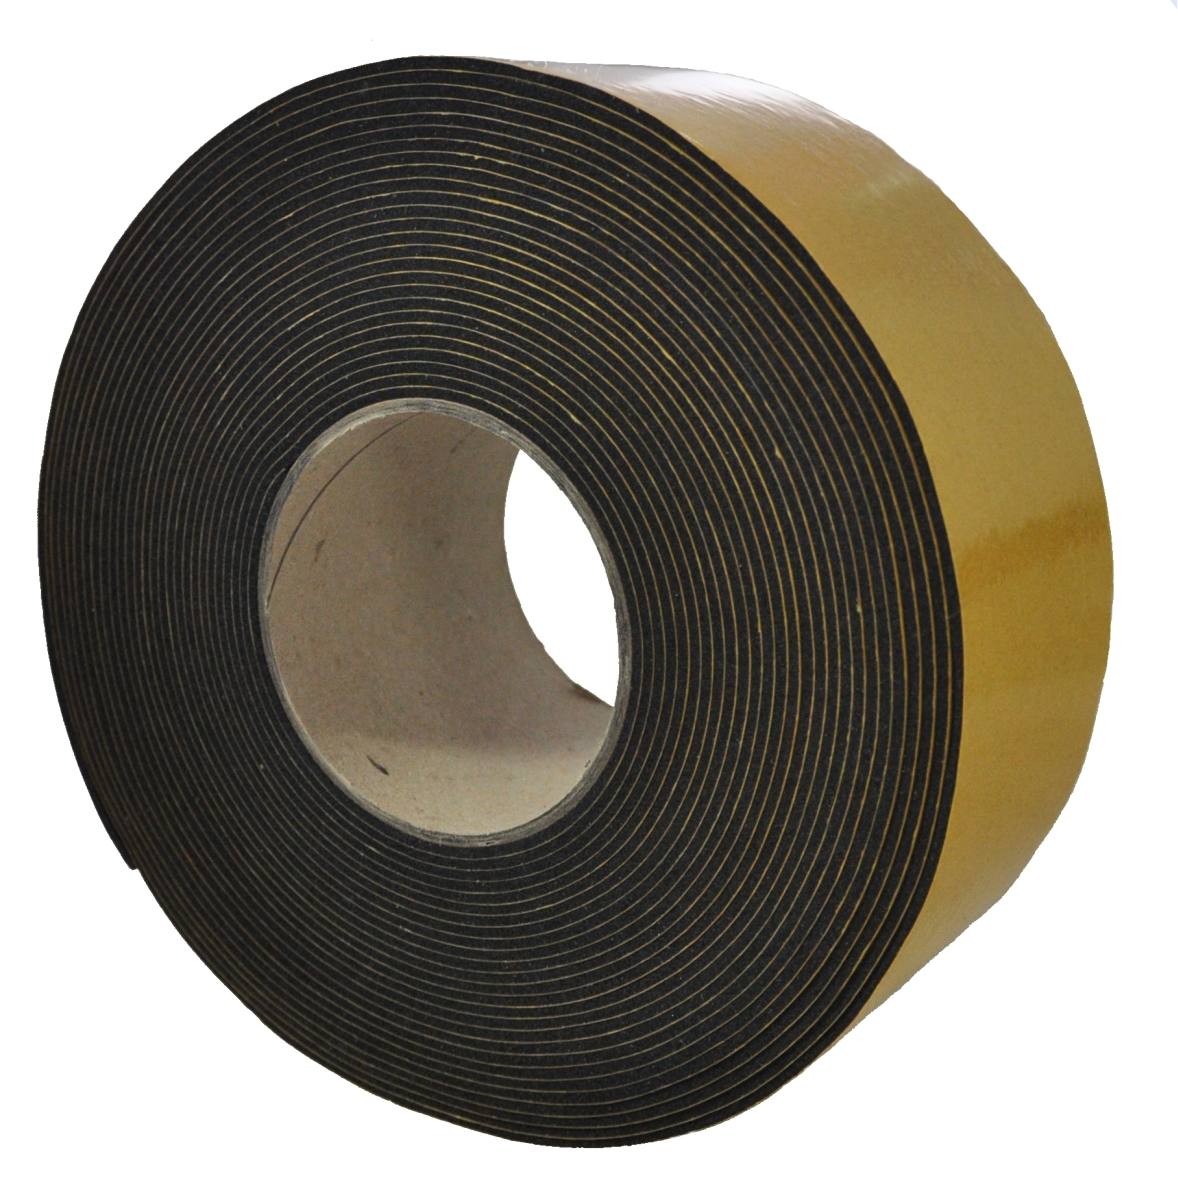 S-K-S EPDM 4mmx75mmx10m black self-adhesive on one side